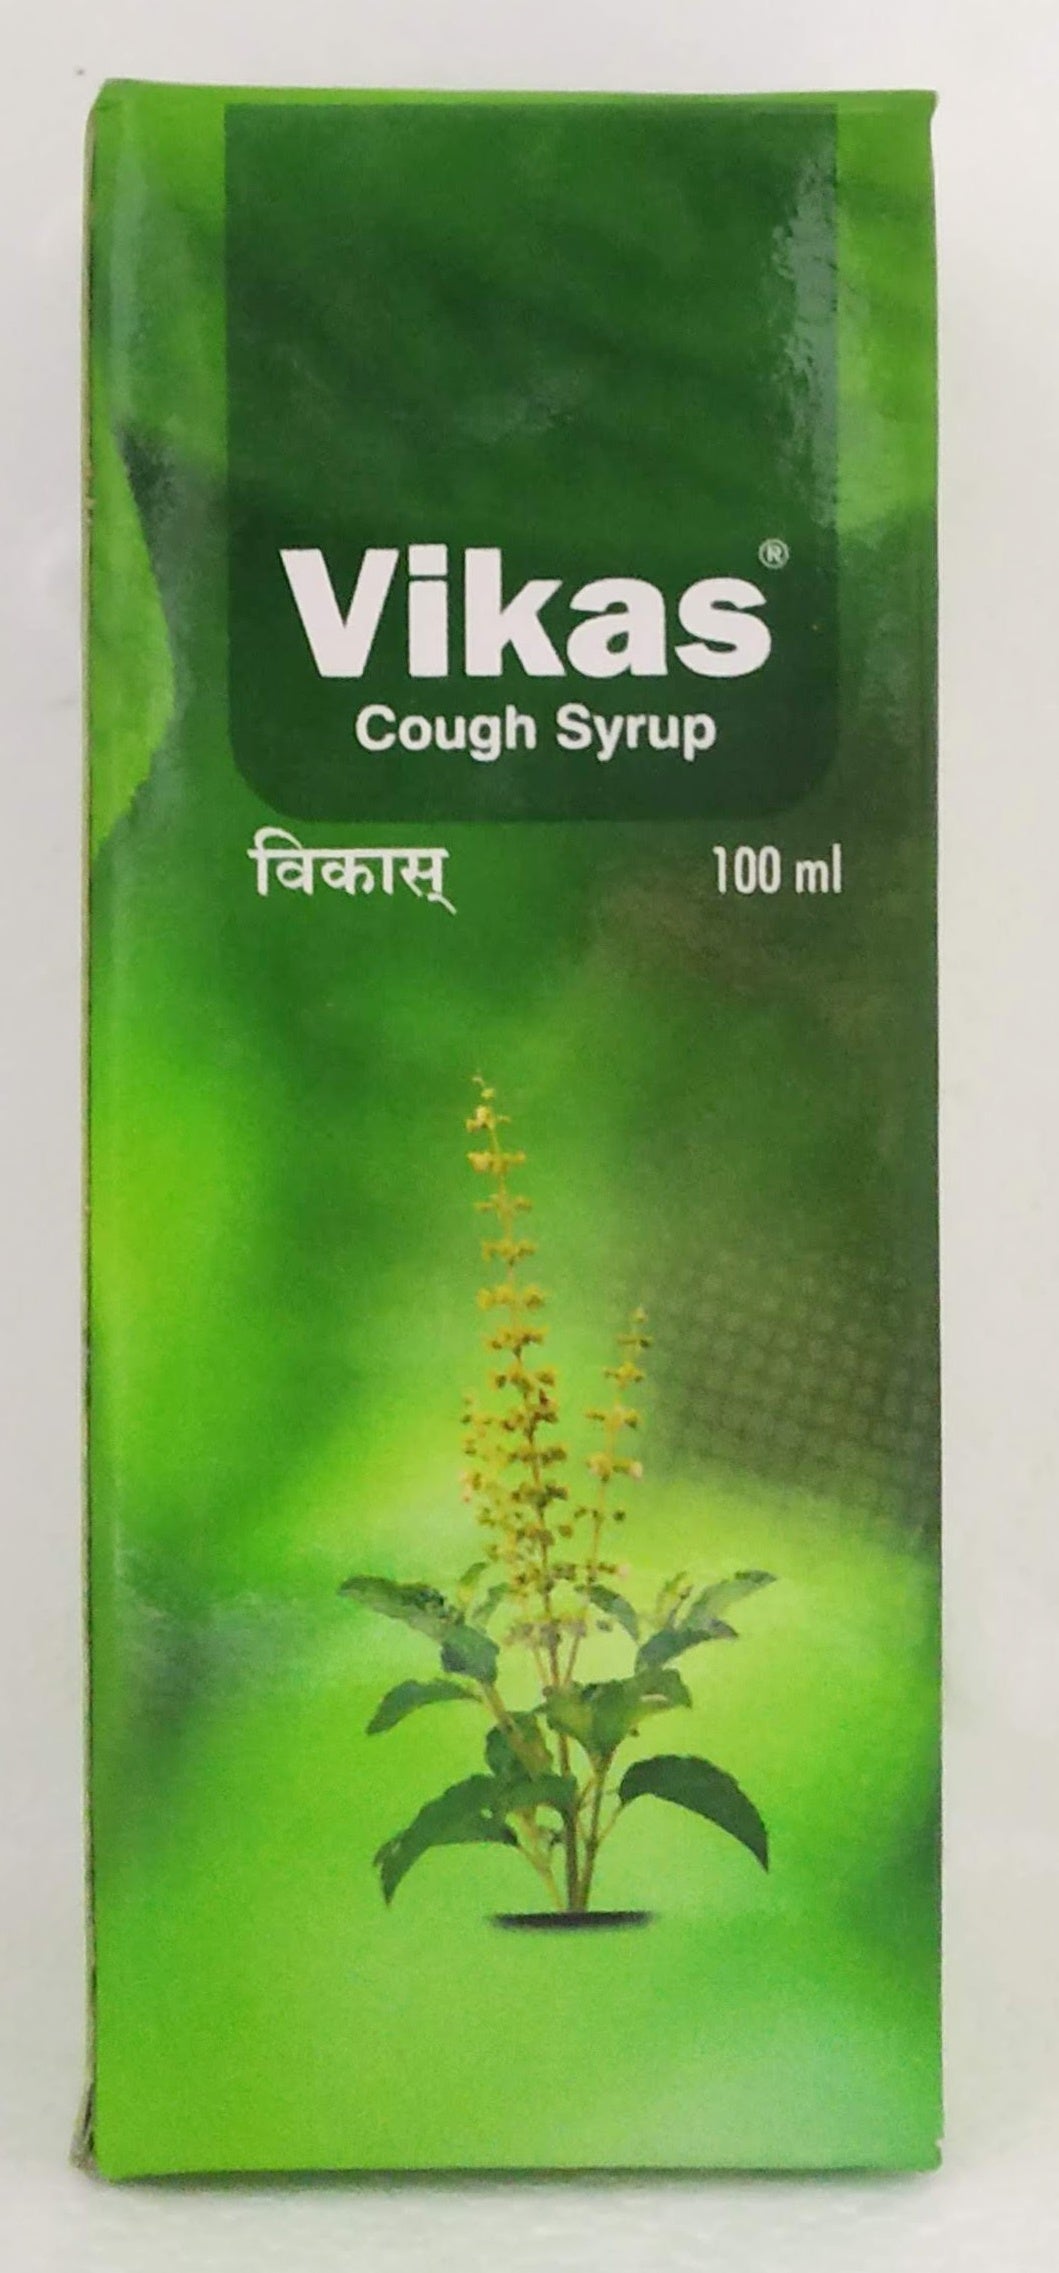 Shop Vikas Cough Syrup 100ml at price 60.00 from Sagar Online - Ayush Care